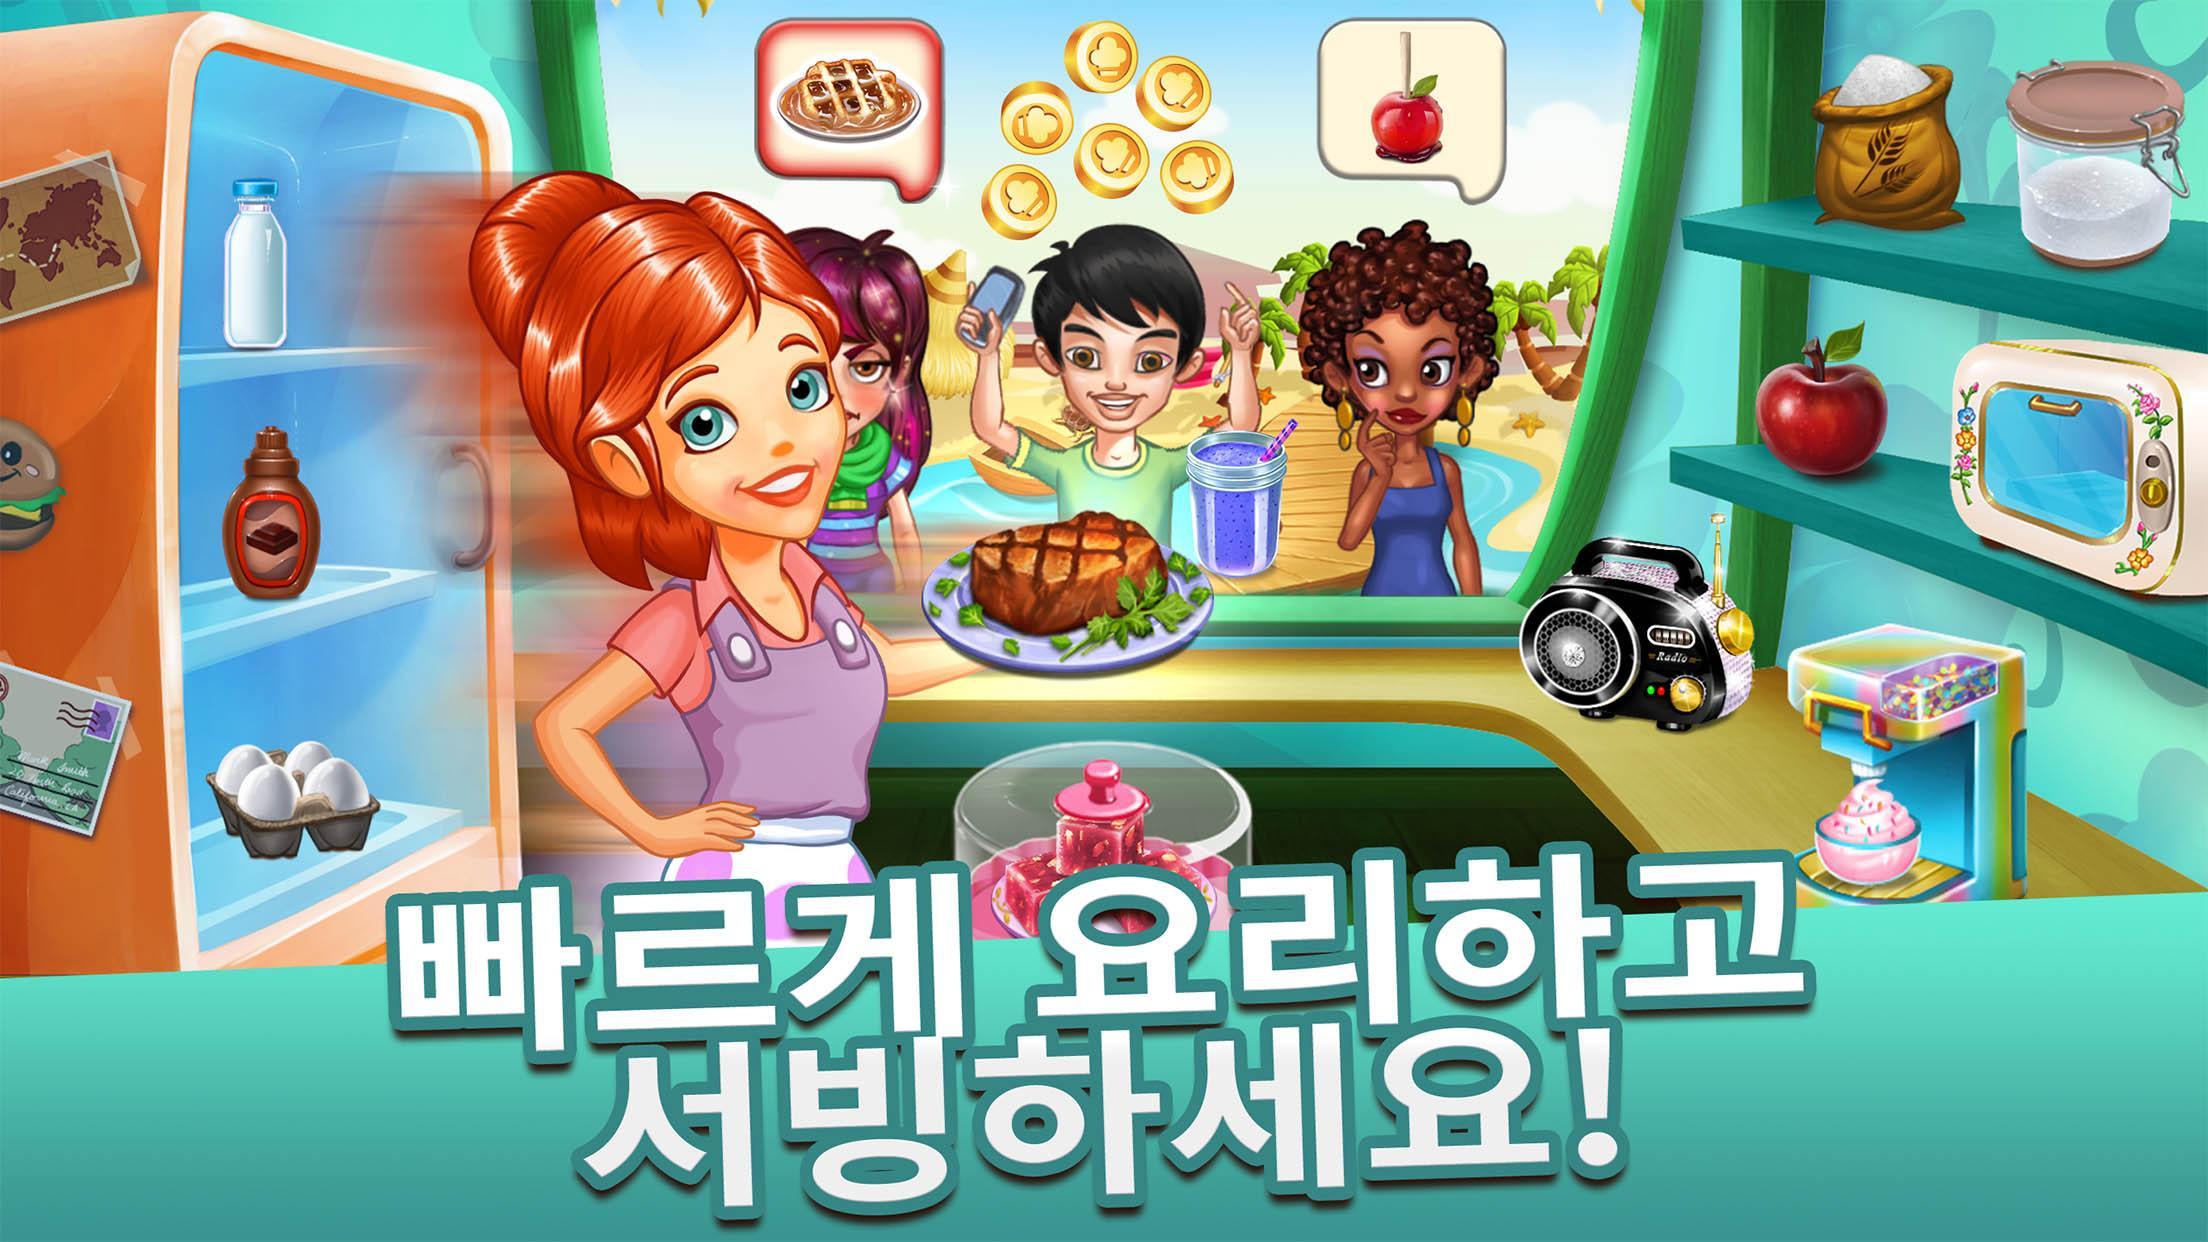 Screenshot 1 of Cooking Tale - 쿠킹 테일 2.572.0